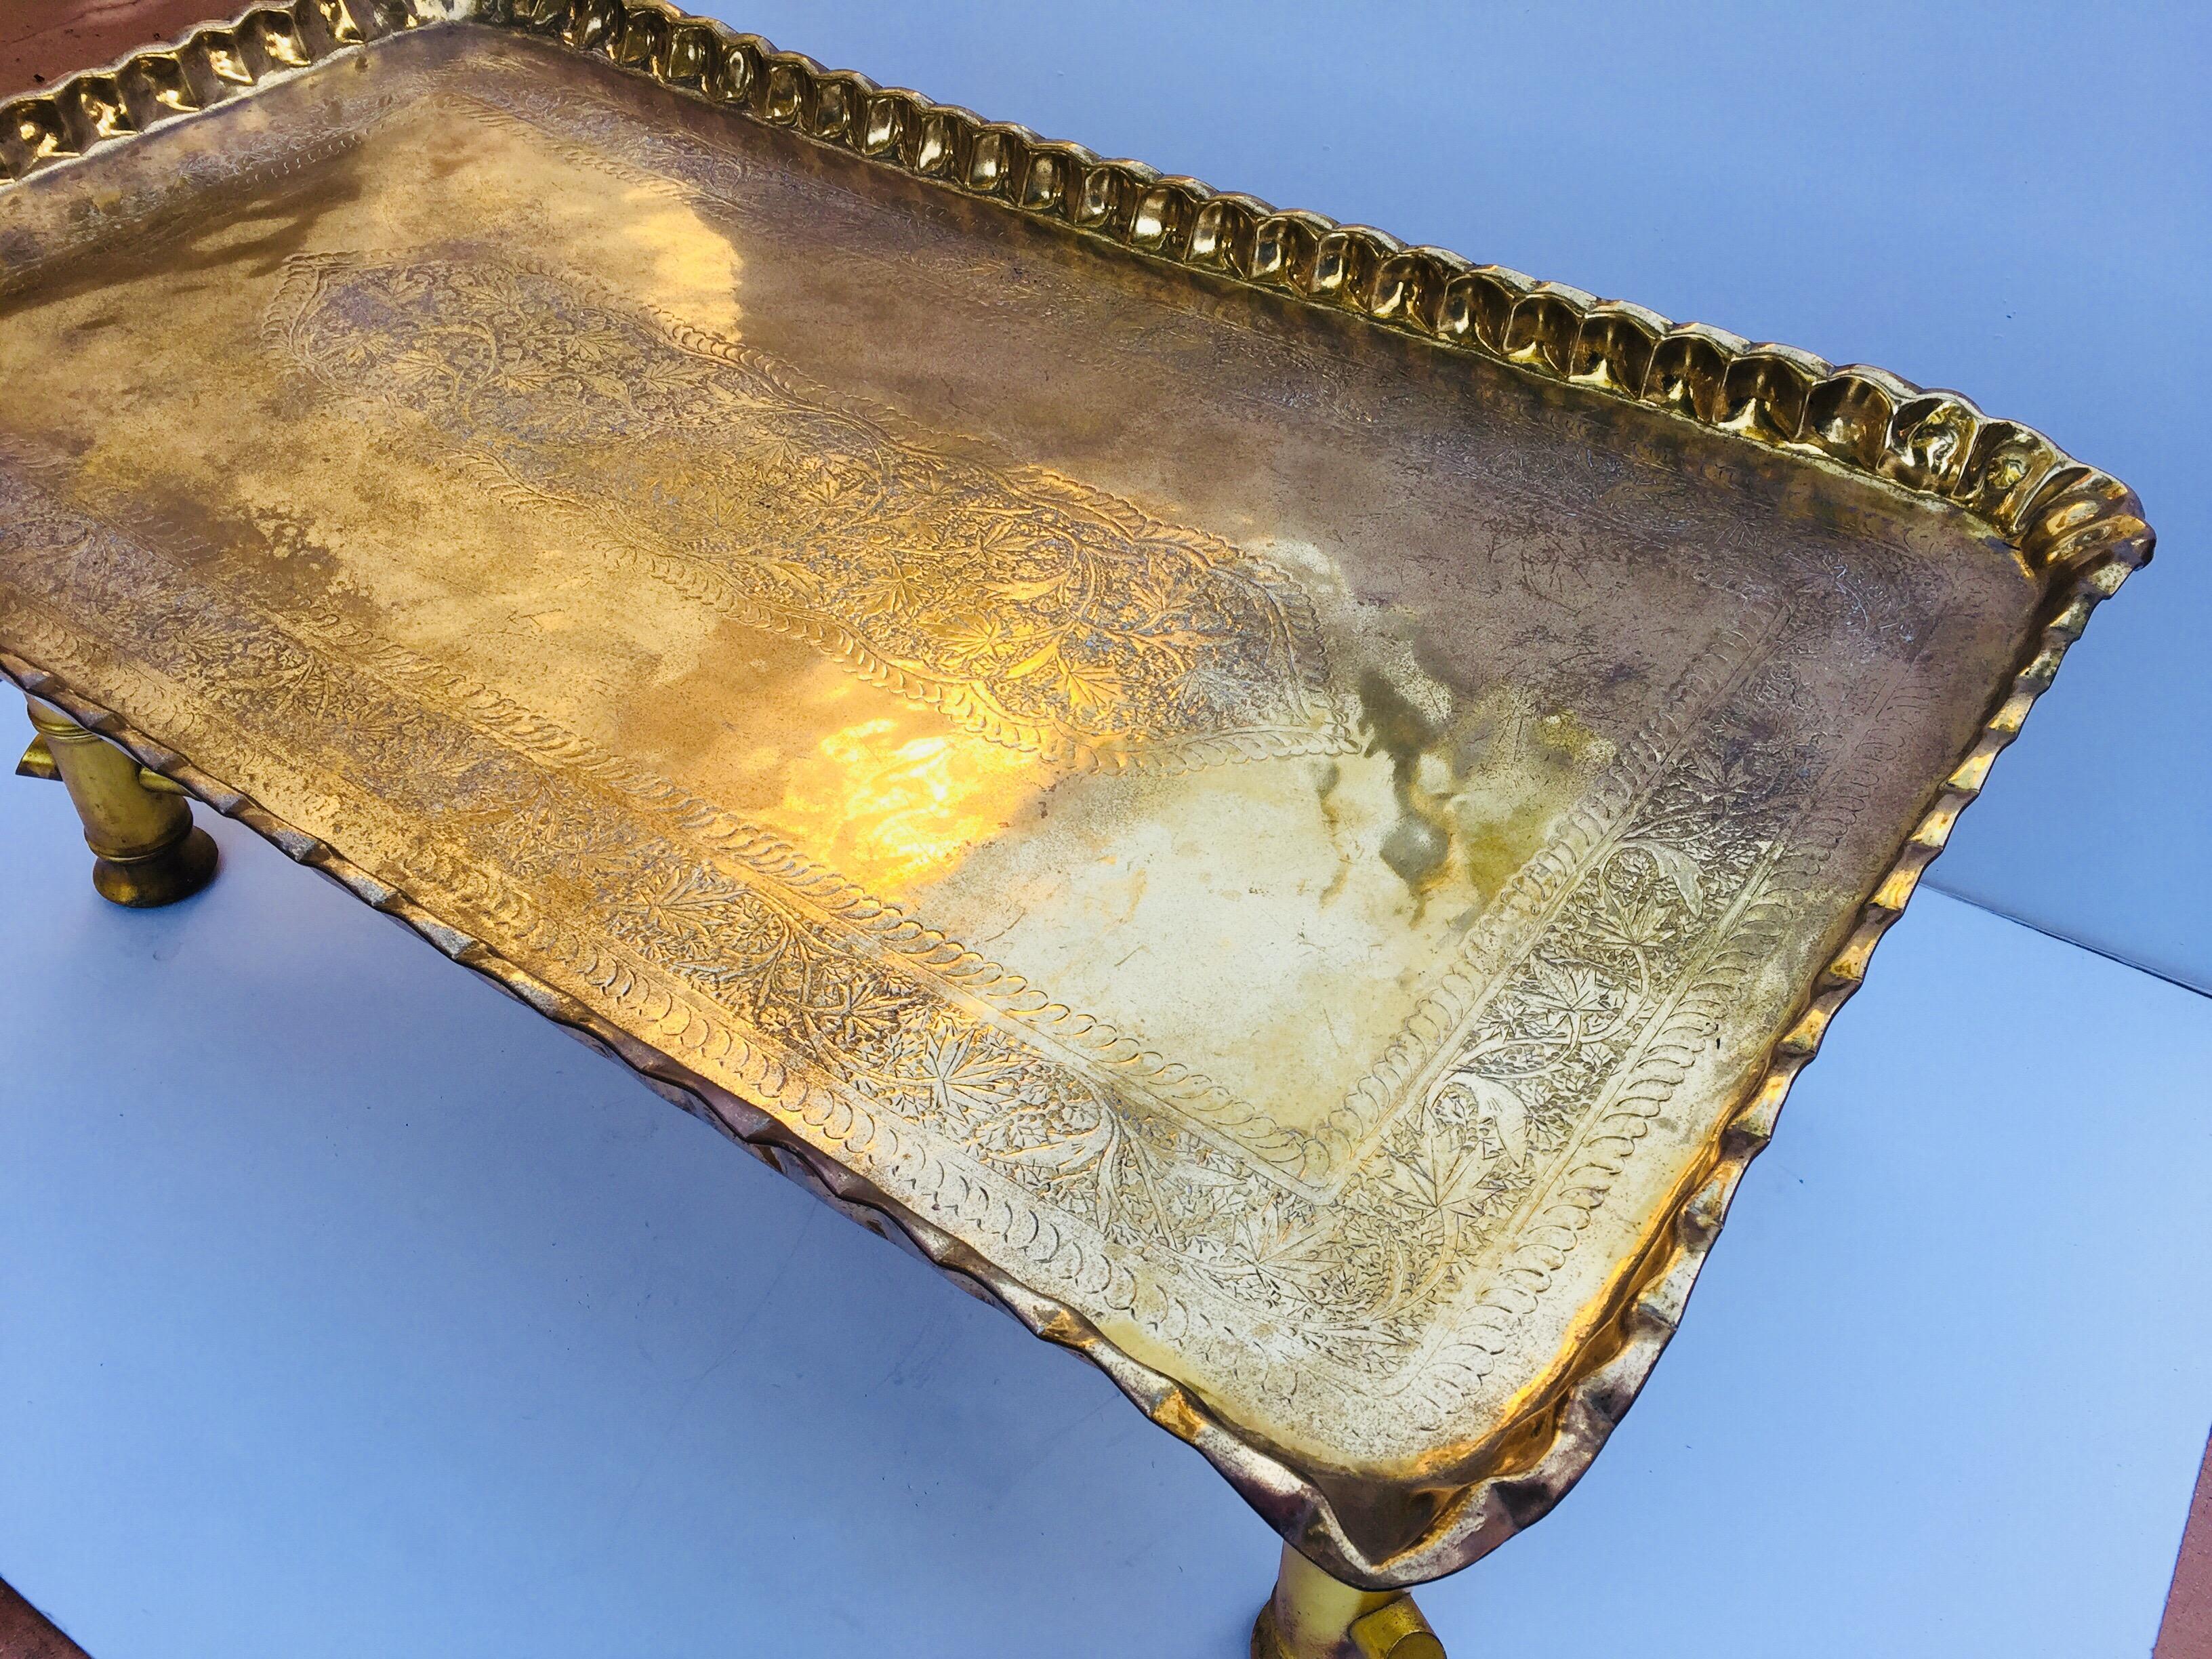 Moroccan rectangular brass tray coffee table.
Large rectangular hand etched, hammered and embossed, chiseled brass tray table on gilded wooden base in faux bamboo design. 
Middle Eastern Moroccan style coffee or cocktail table great to use indoor or